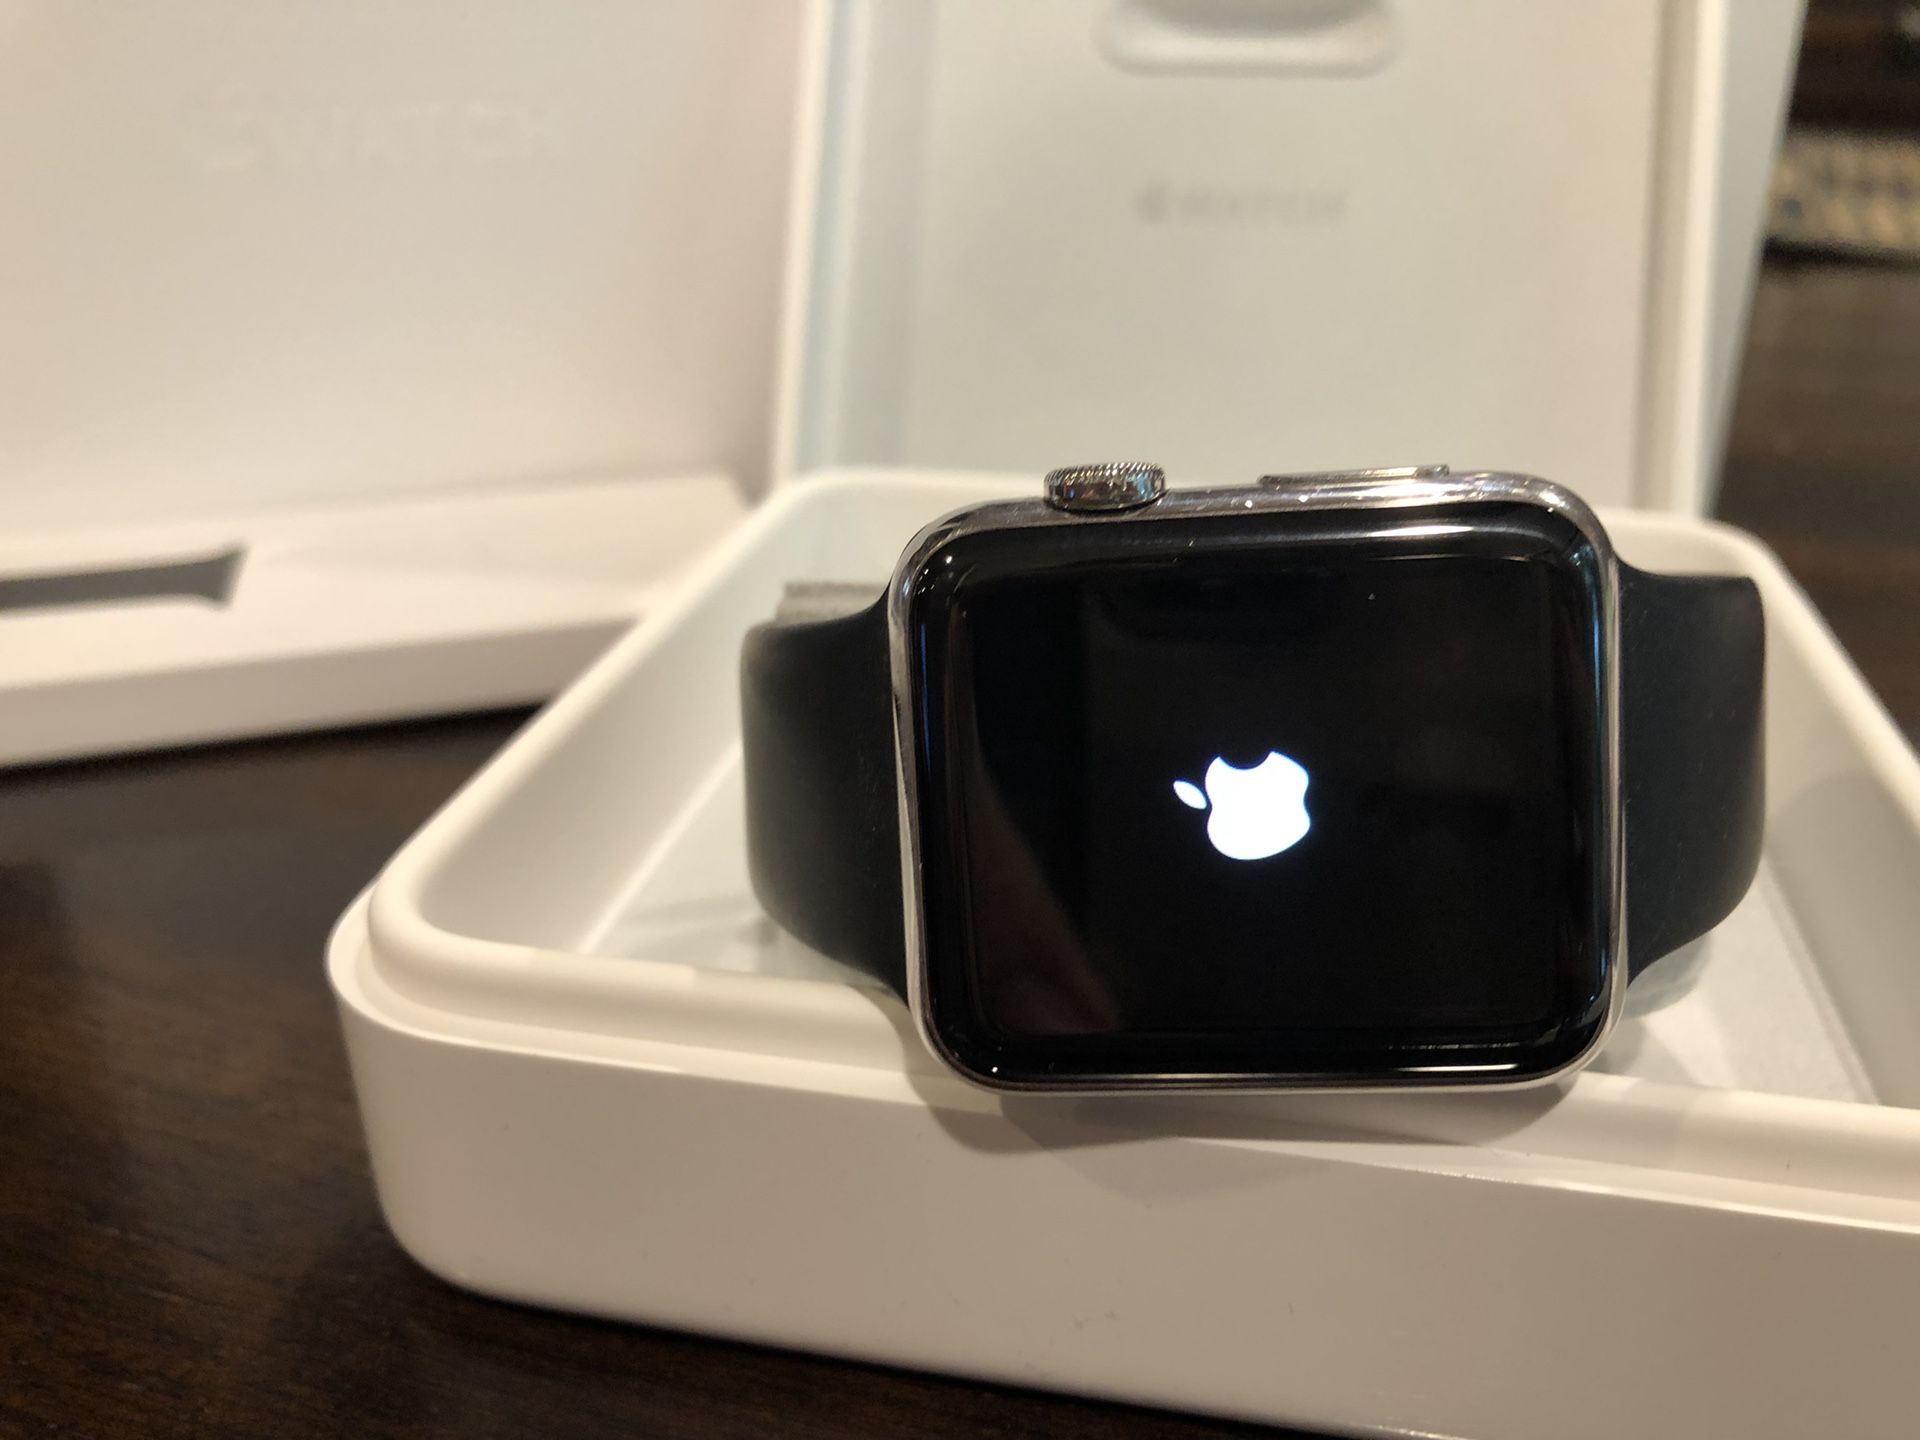 Apple Watch 42mm Stainless Steel with Sapphire Crystal